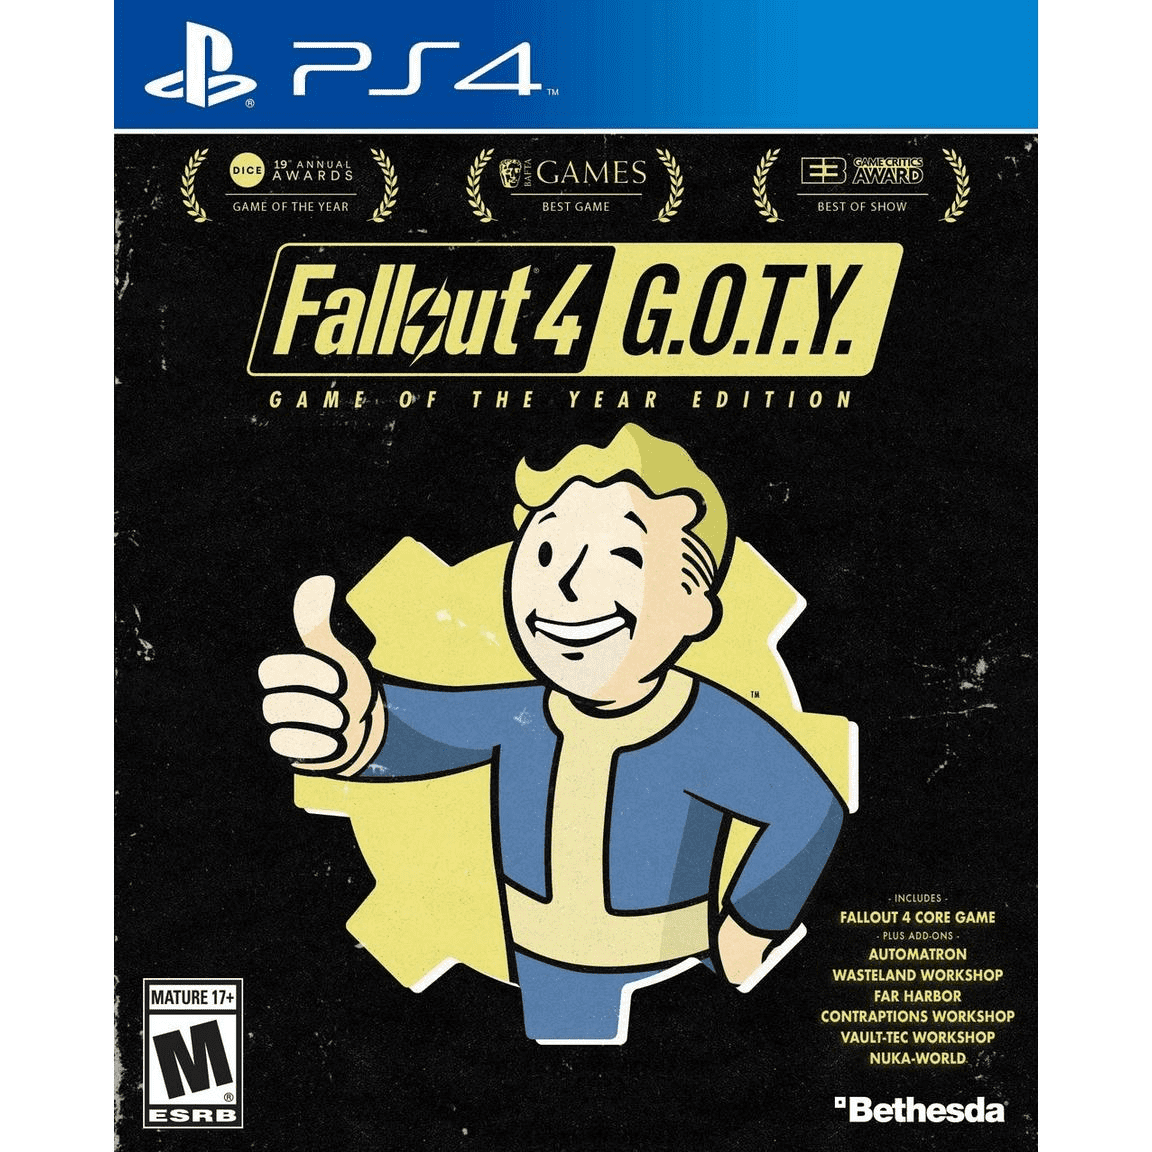 Bethesda Fallout 4 Year (PS4) Game Steelbook the of